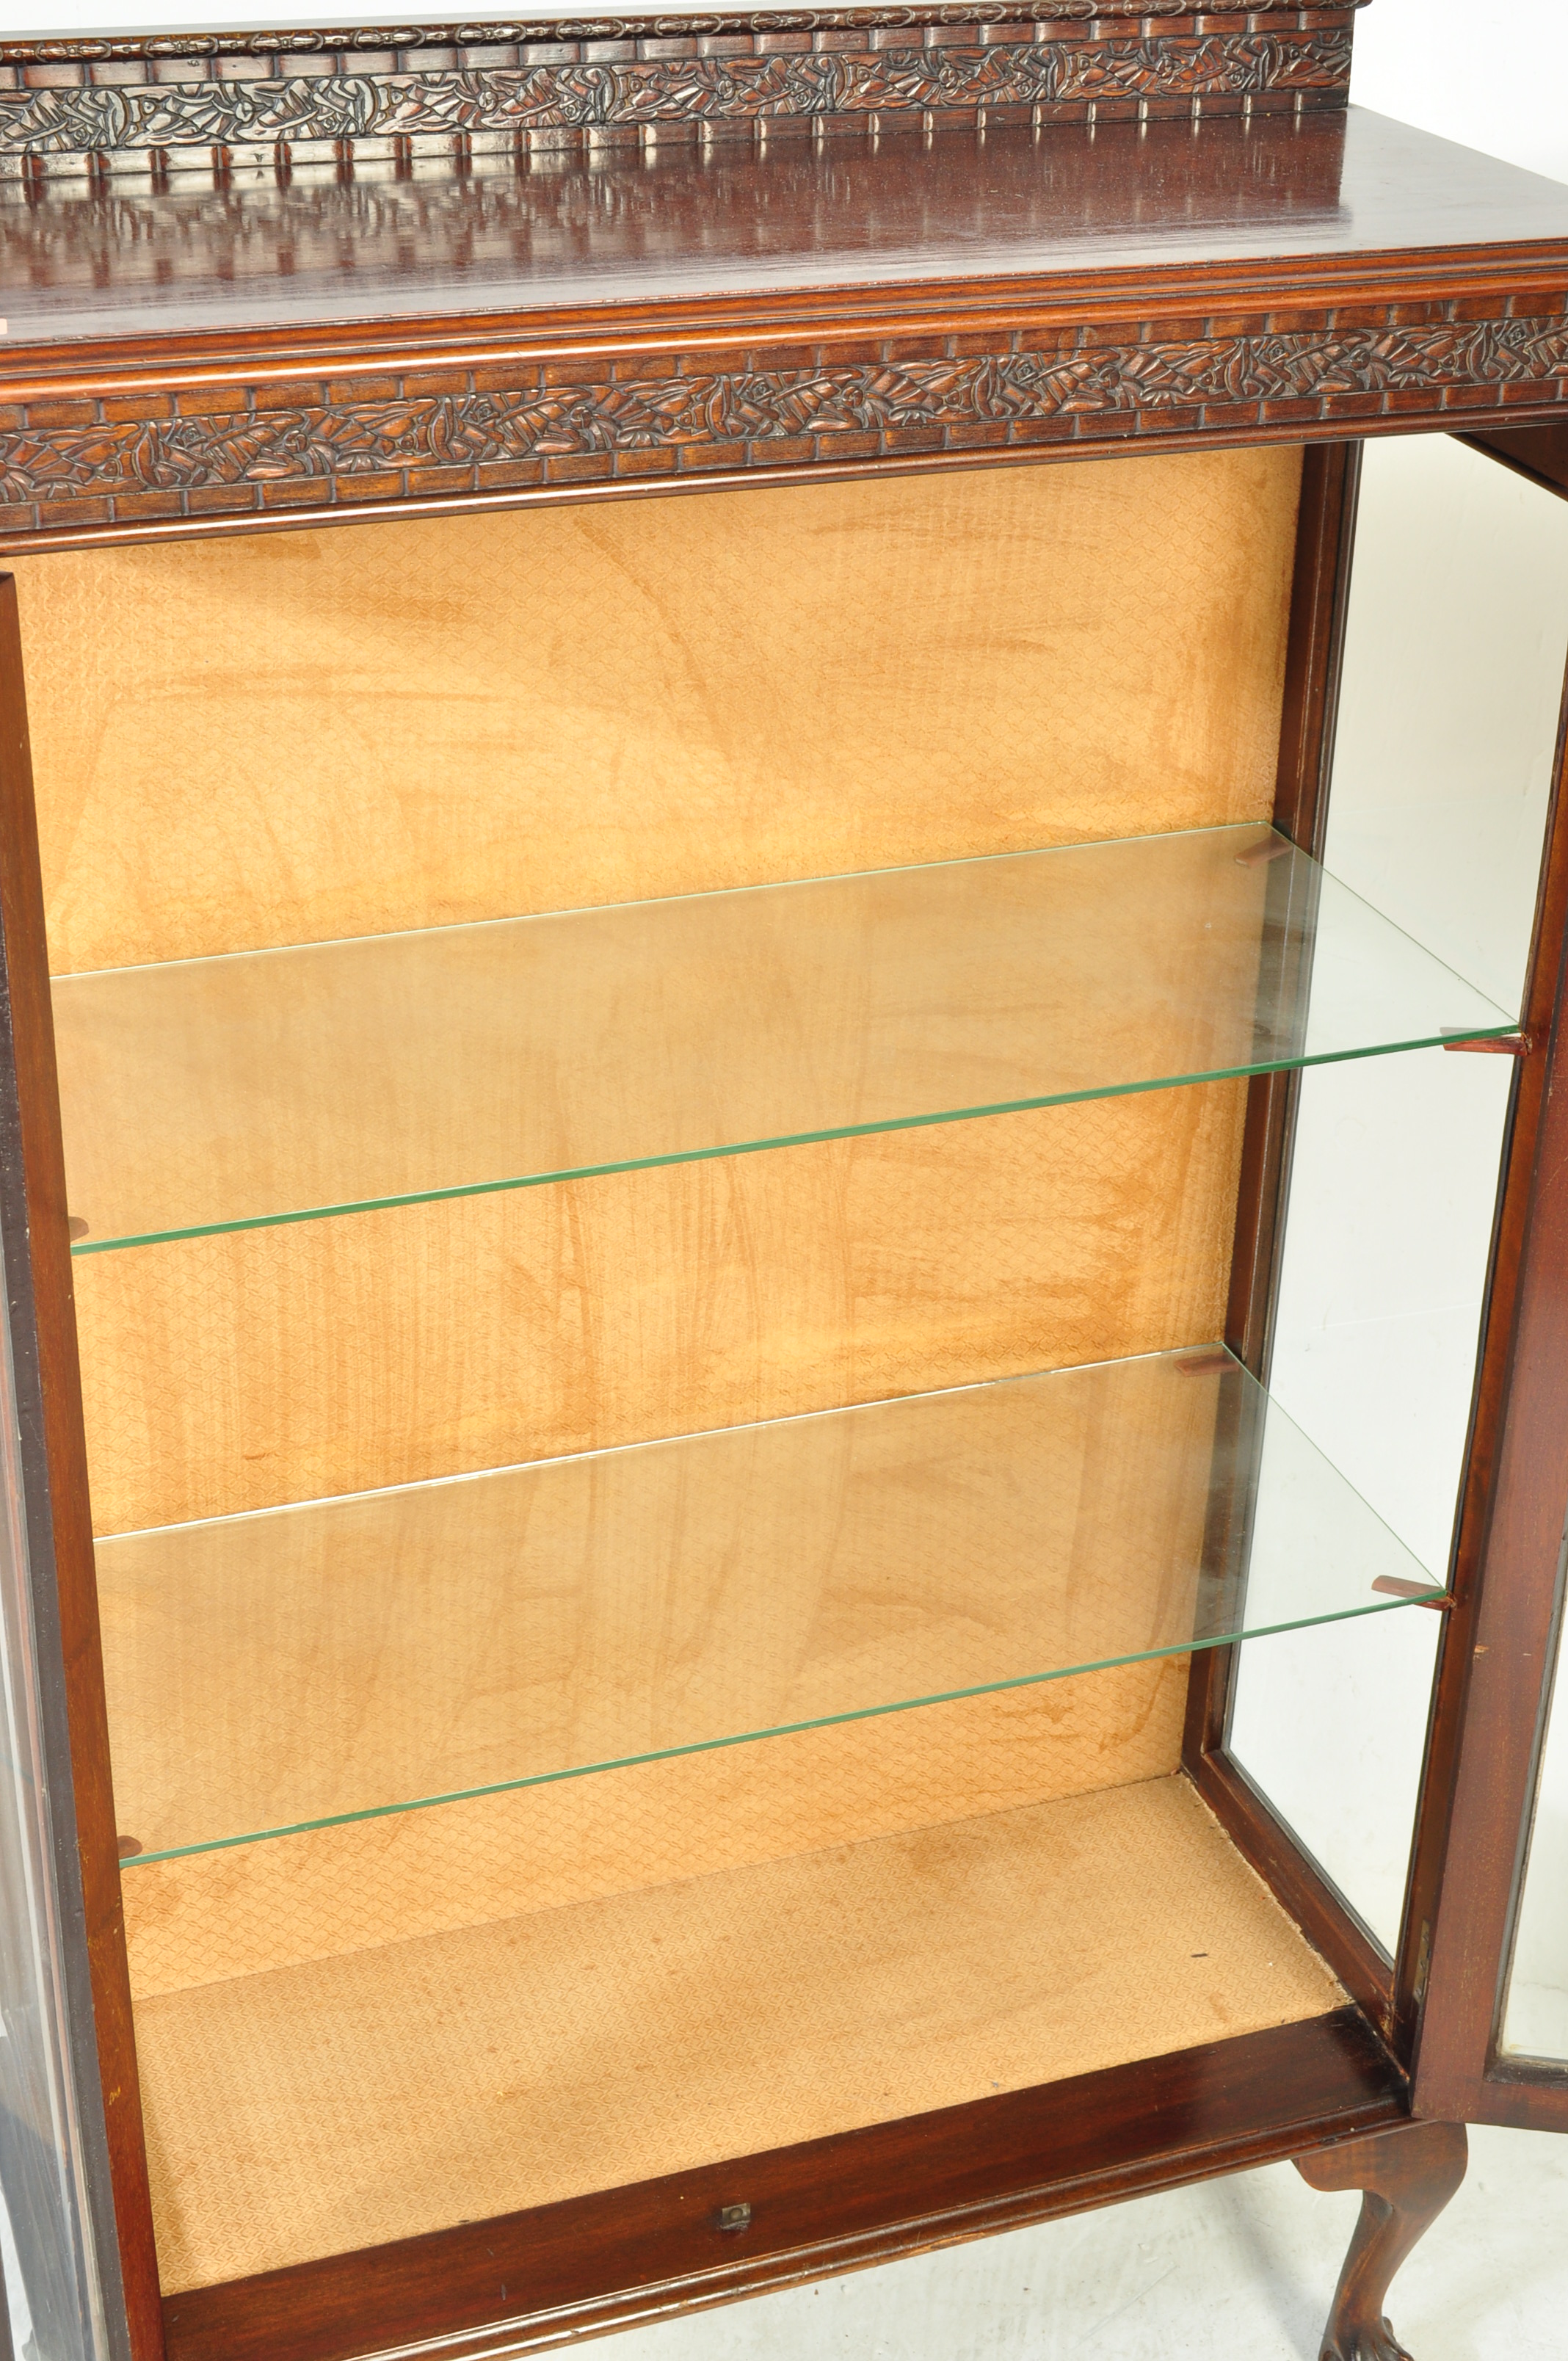 1930'S QUEEN ANNE REVIVAL MAHOGANY CHINA DISPLAY CABINET - Image 4 of 6